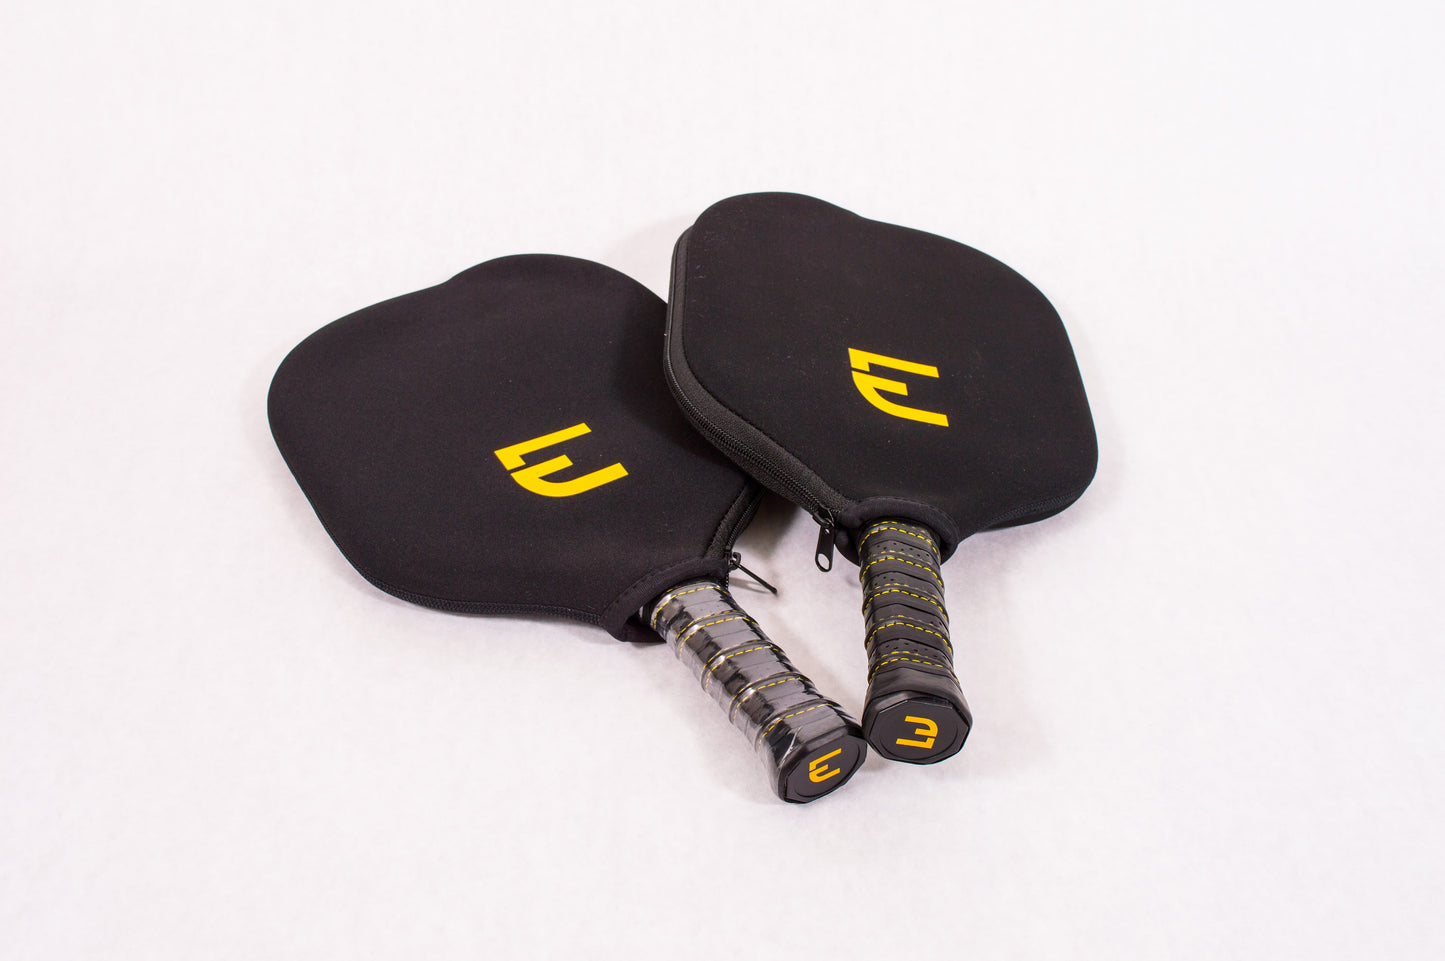 Two Electrum Pro Pickleball Paddles in Protective Electrum Covers